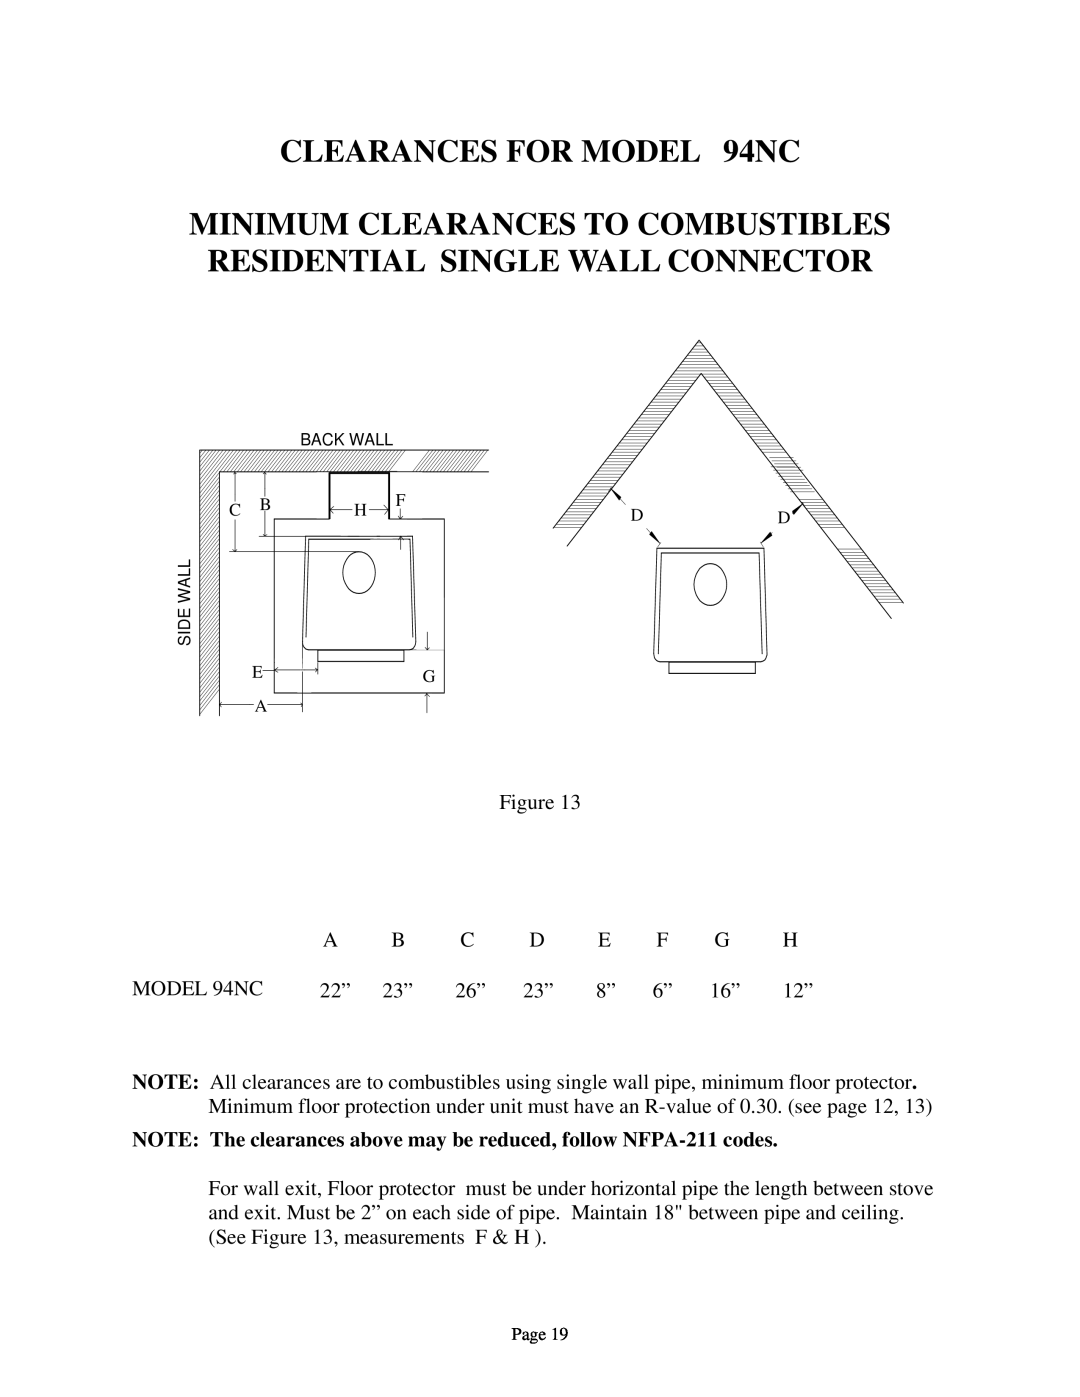 New Buck Corporation installation instructions CLEARANCES FOR MODEL 94NC 